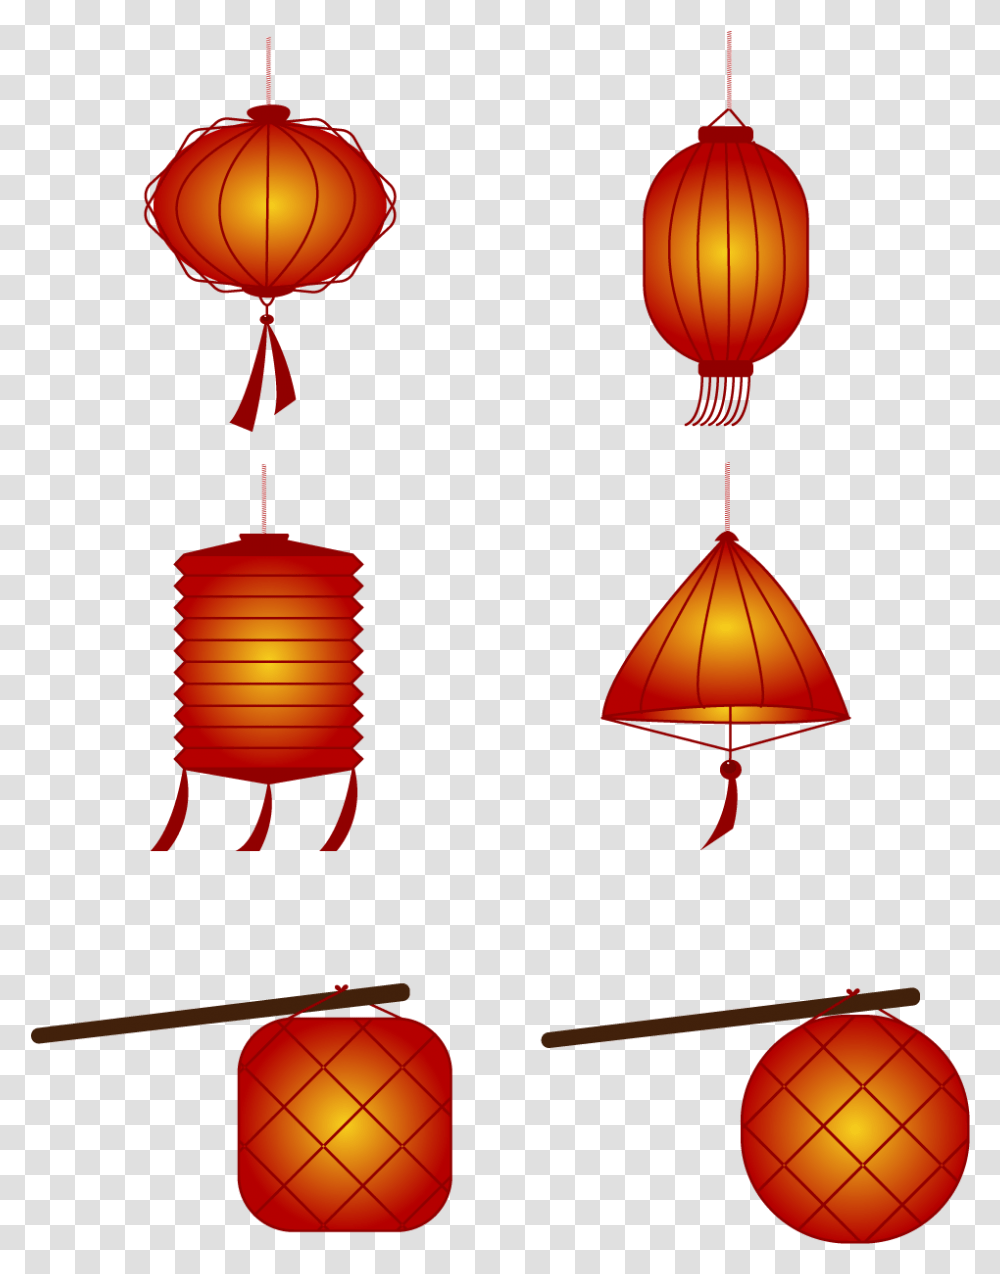 Lantern Red New Year Festive And Vector Image Paper Lantern, Lamp, Lighting, Plot Transparent Png